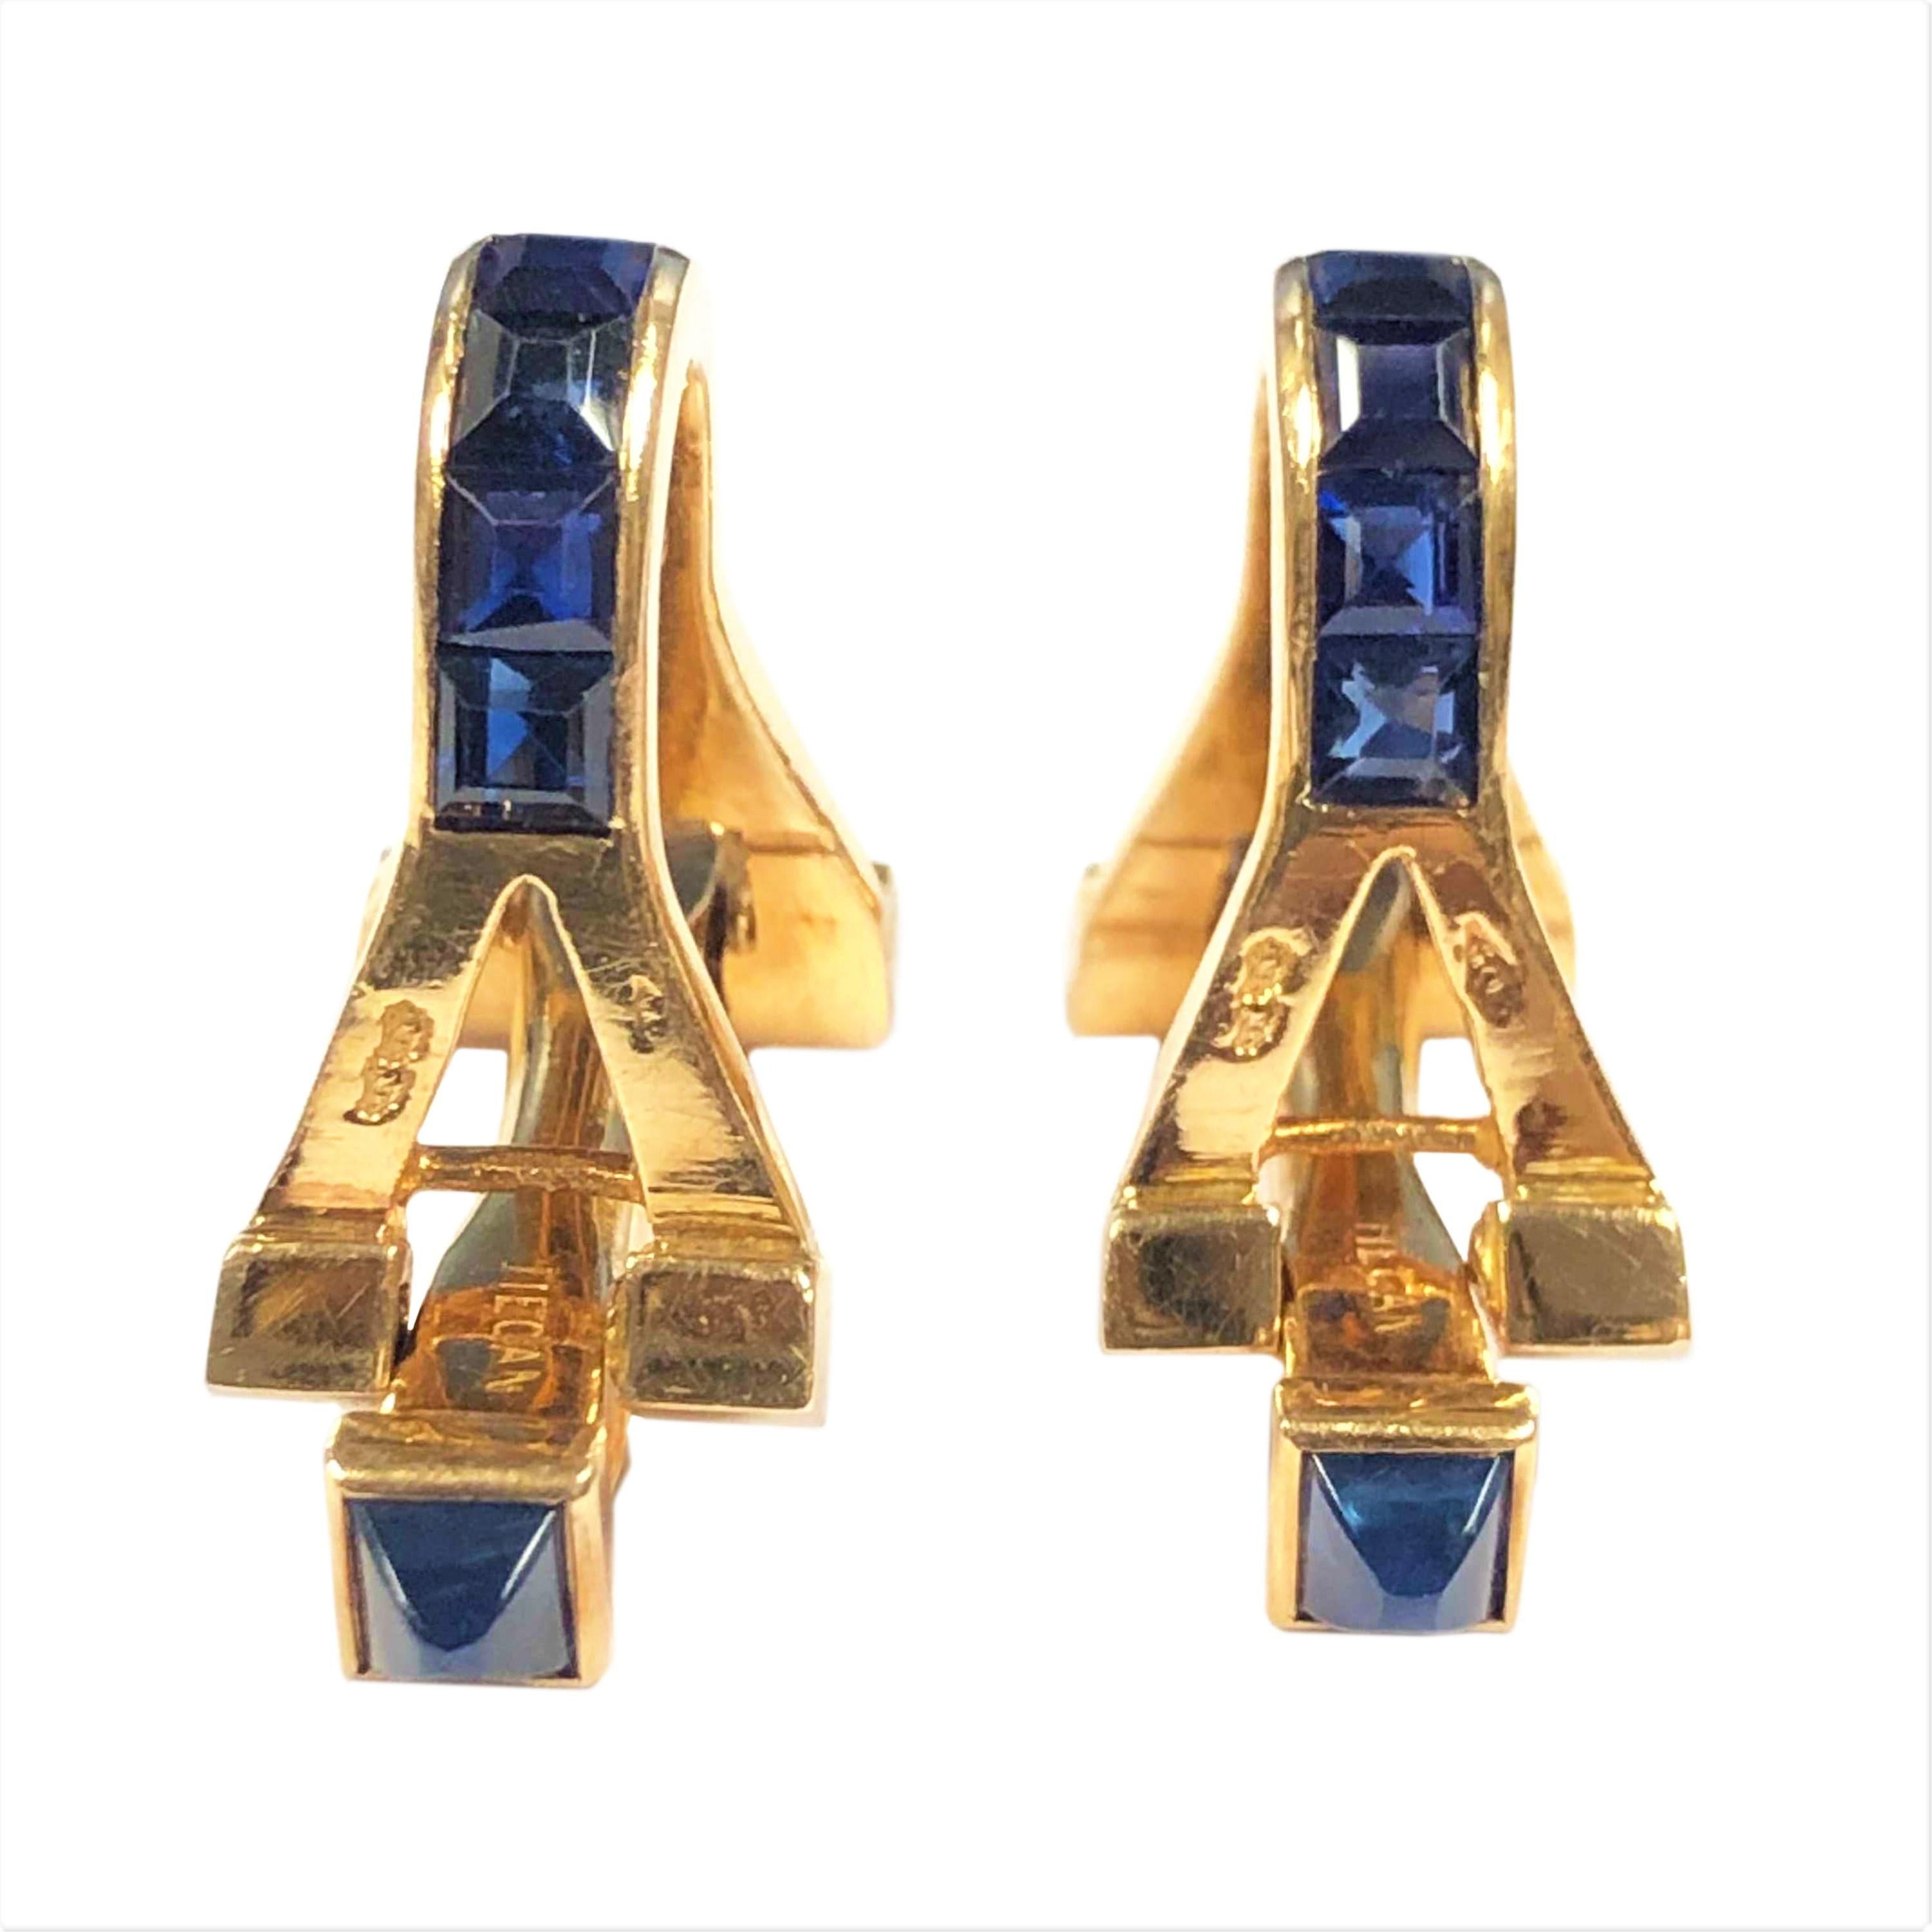 Circa 1960s French stamped 18k Yellow Gold cufflinks, set with Fine Square cut Sapphires and also having Cabochon Pyramid shape Sapphires on each end. Nice solid construction, weighing 12.3 Grams and having an easy on and off hinged lock. These come